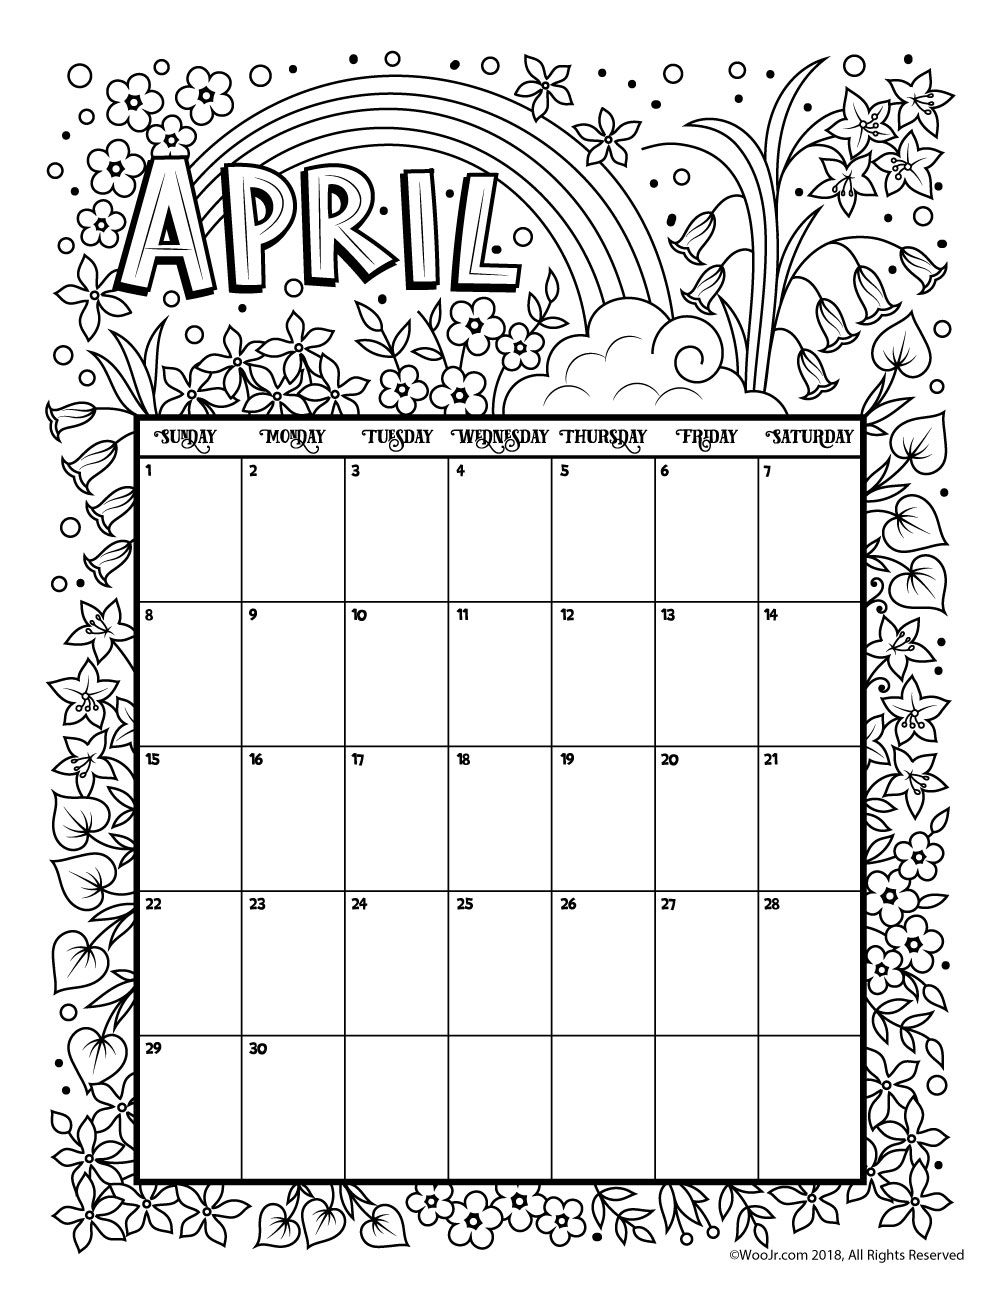 april-calendar-coloring-page-free-printable-coloring-pages